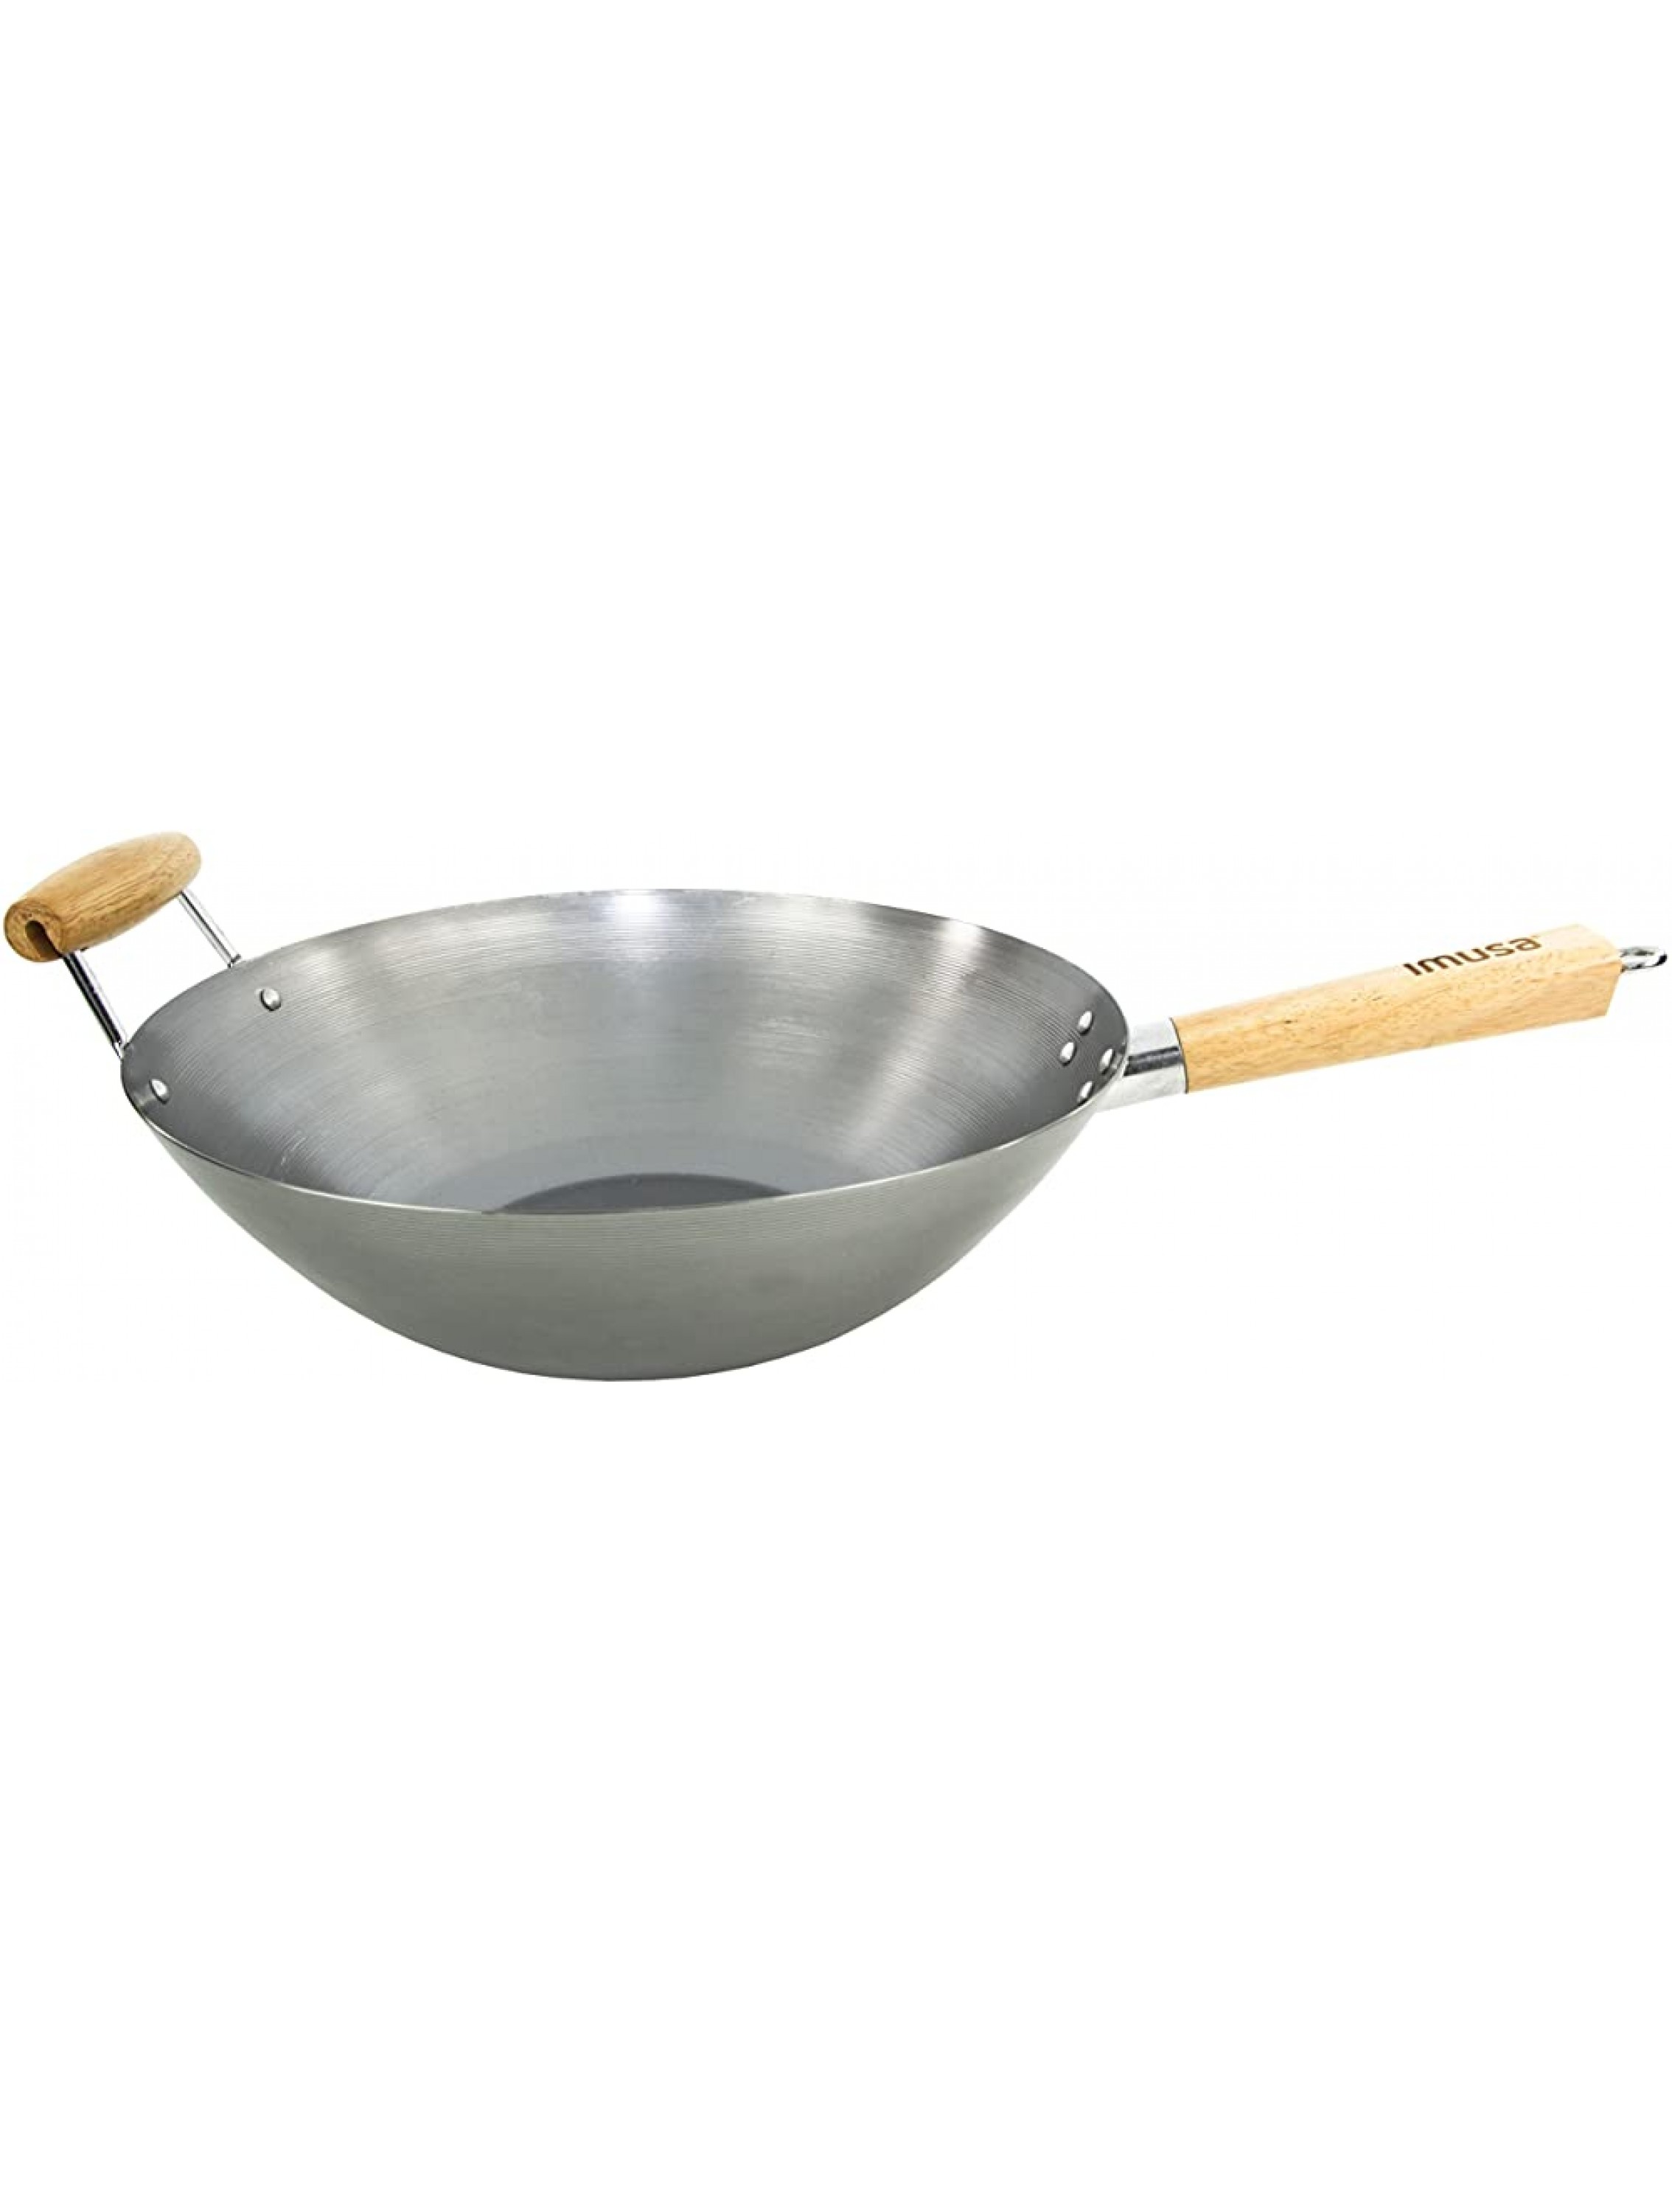 IMUSA USA WPAN-10018 Non-coated Wok with Wooden Handles 14-Inch Silver - B6X2VP1LA